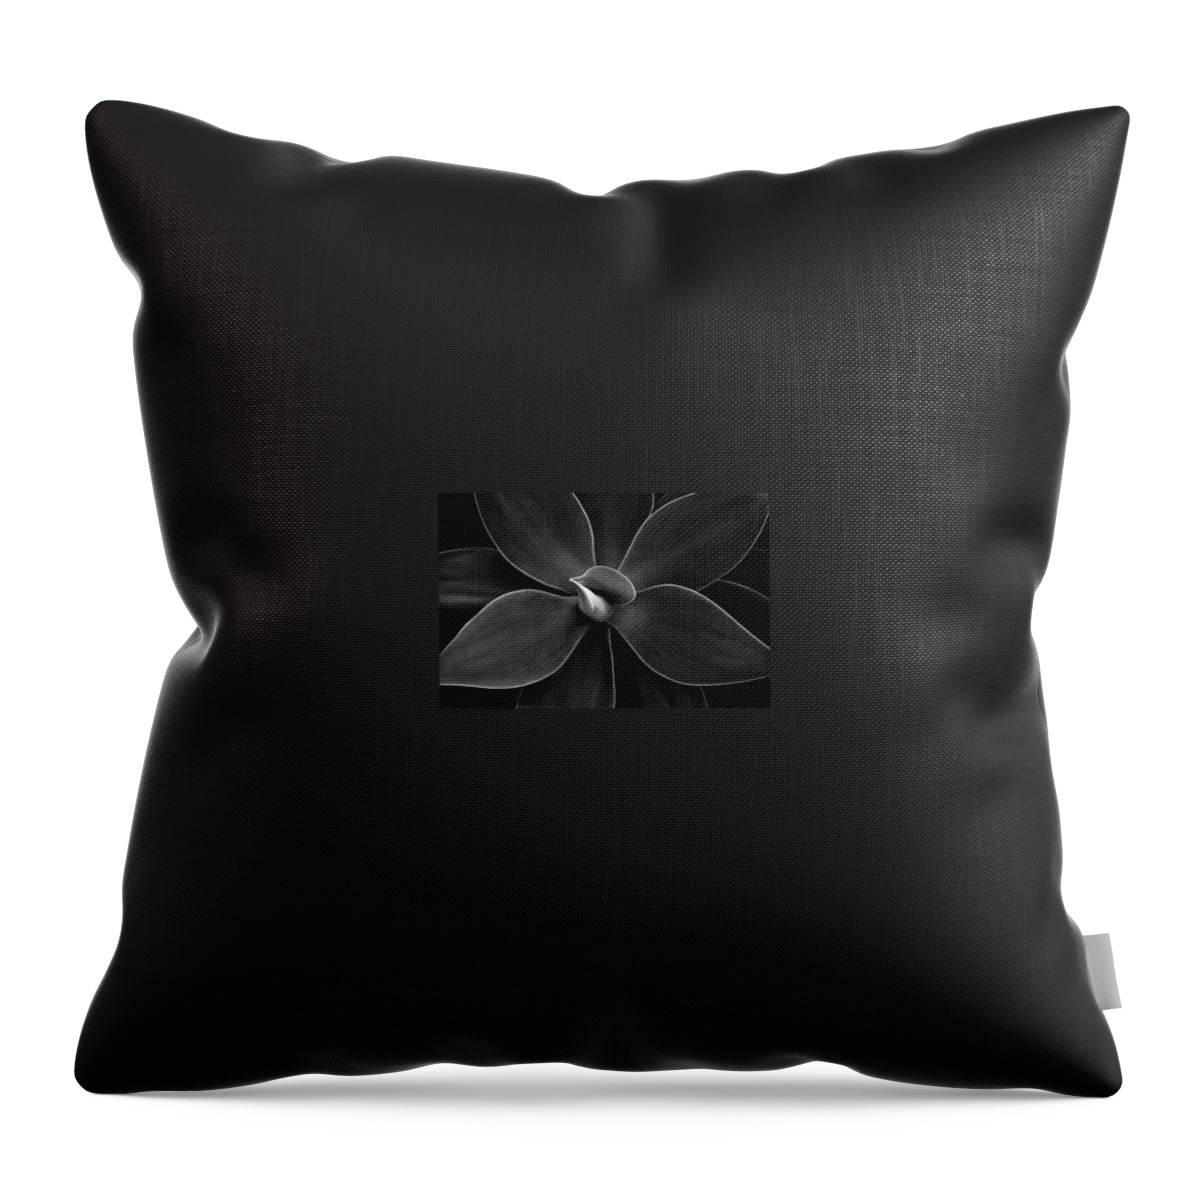 Agave Throw Pillow featuring the photograph Agave Leaves Detail by Marilyn Hunt